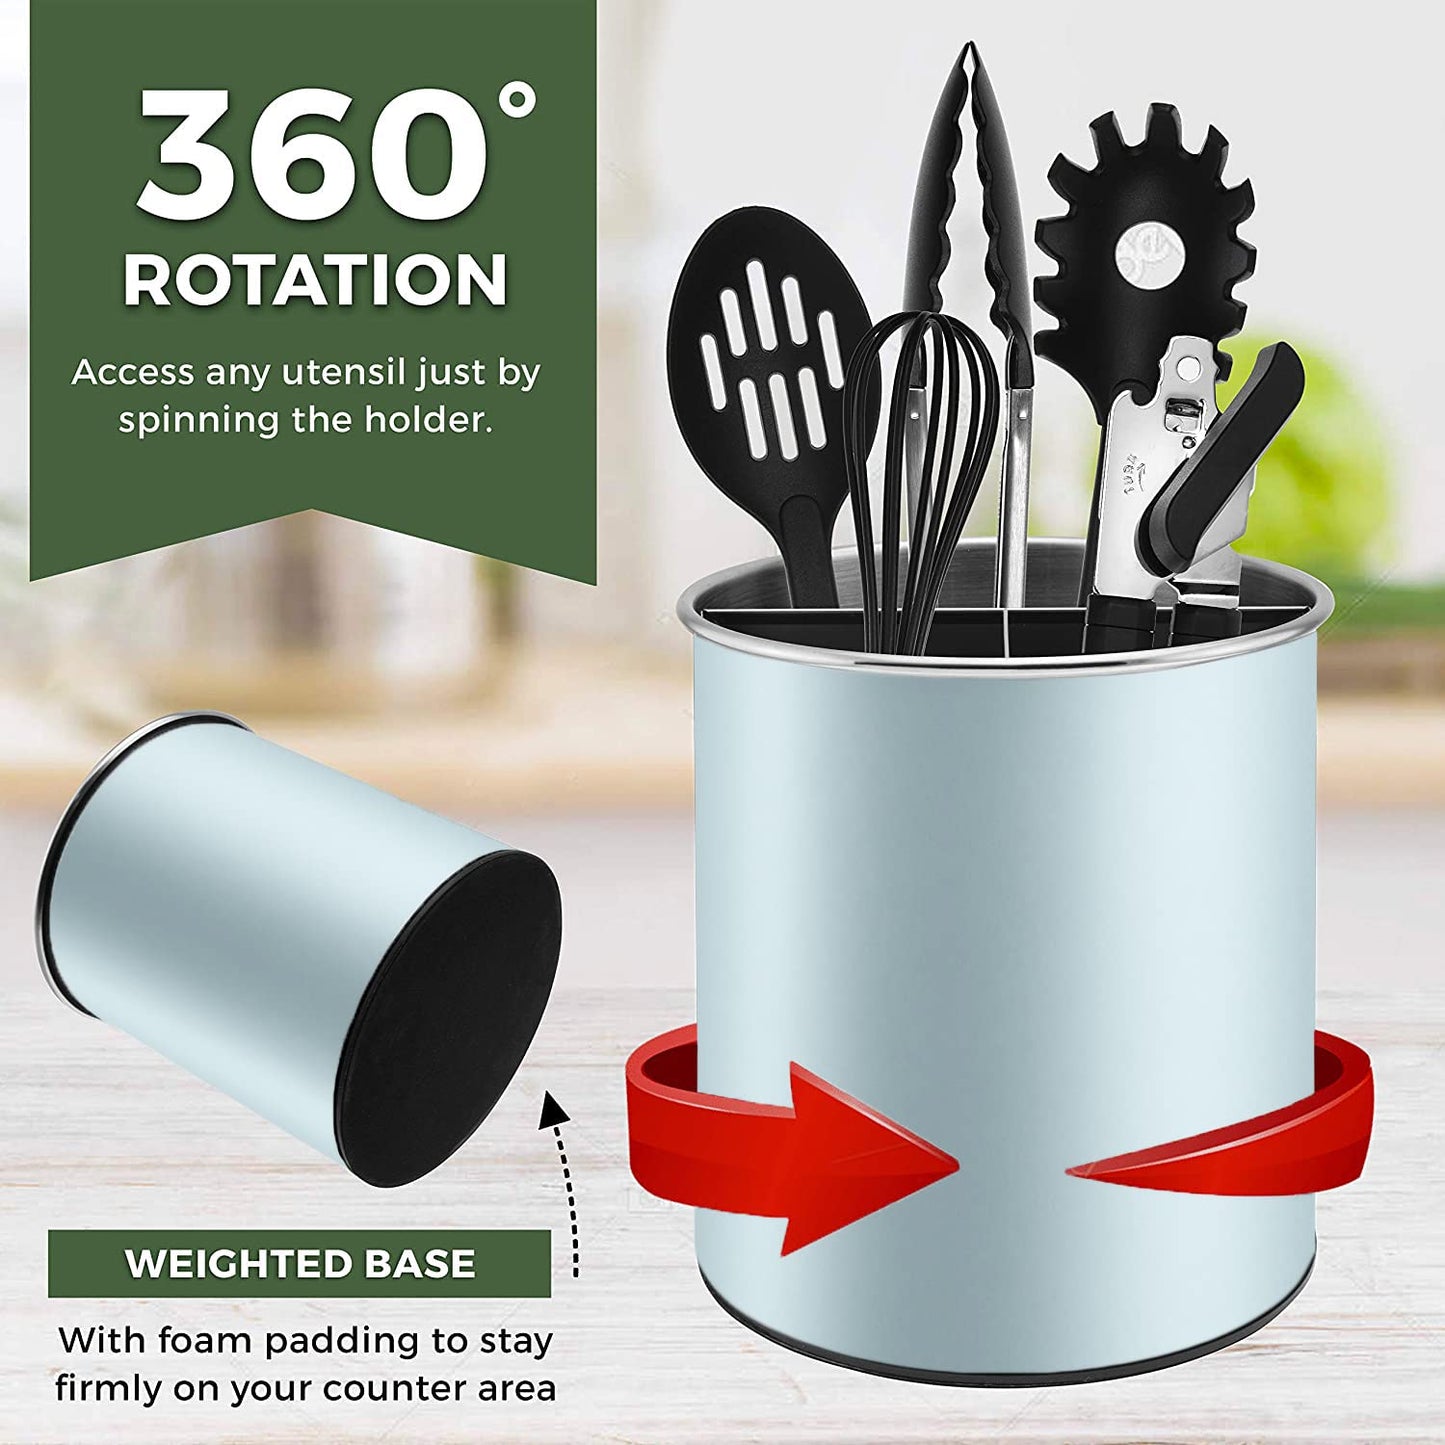 Bartnelli Extra Large Stainless Steel Kitchen Utensil Holder - 360° Rotating Utensil Caddy - Weighted Base for Stability - Countertop Organizer Crock With Removable Divider (BLUE VELVET))